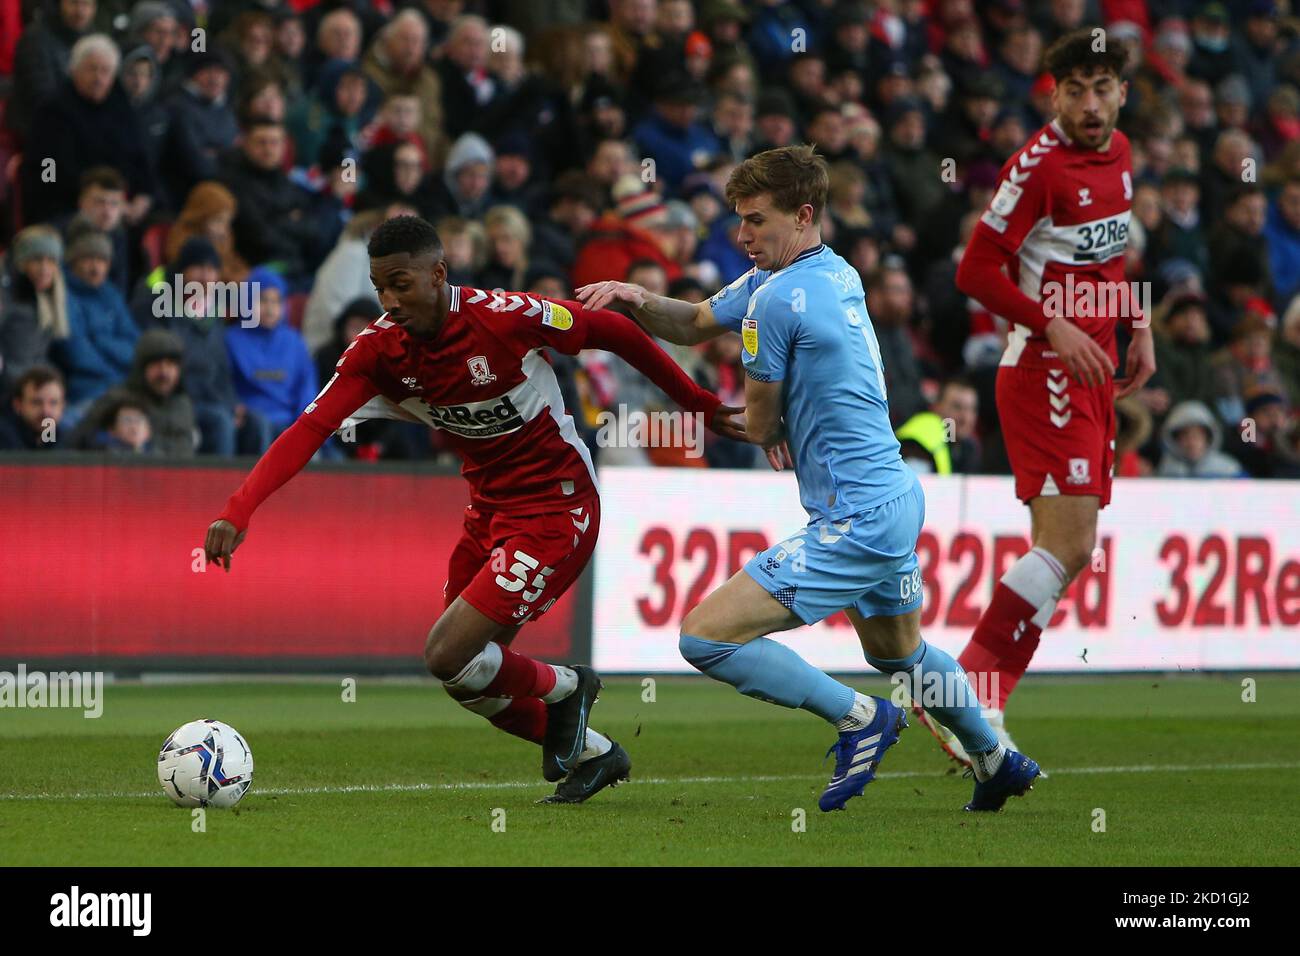 Middlesbrough's Isaiah Jones takes on Coventry City's Ben Sheaf during the Sky Bet Championship match between Middlesbrough and Coventry City at the Riverside Stadium, Middlesbrough on Saturday 29th January 2022. (Photo by Michael Driver/MI News/NurPhoto) Stock Photo